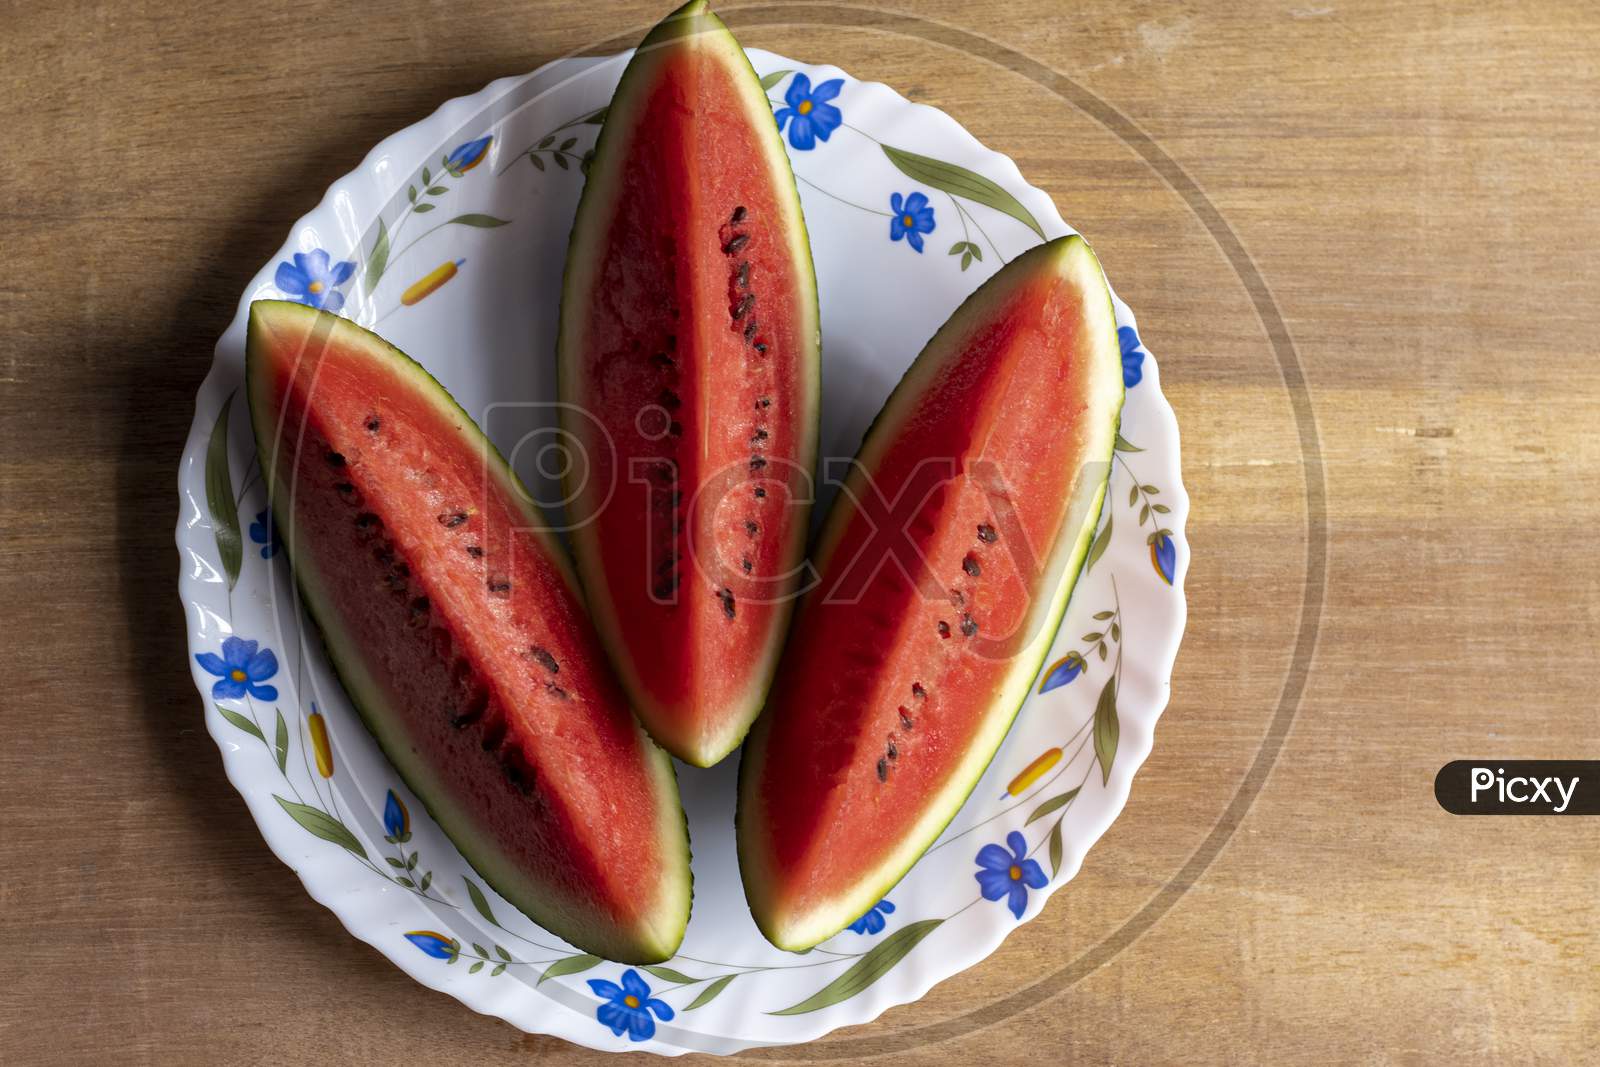 Slices Of Red Juicy Watermelon On Plate In Summer With Space For Text On Right Side